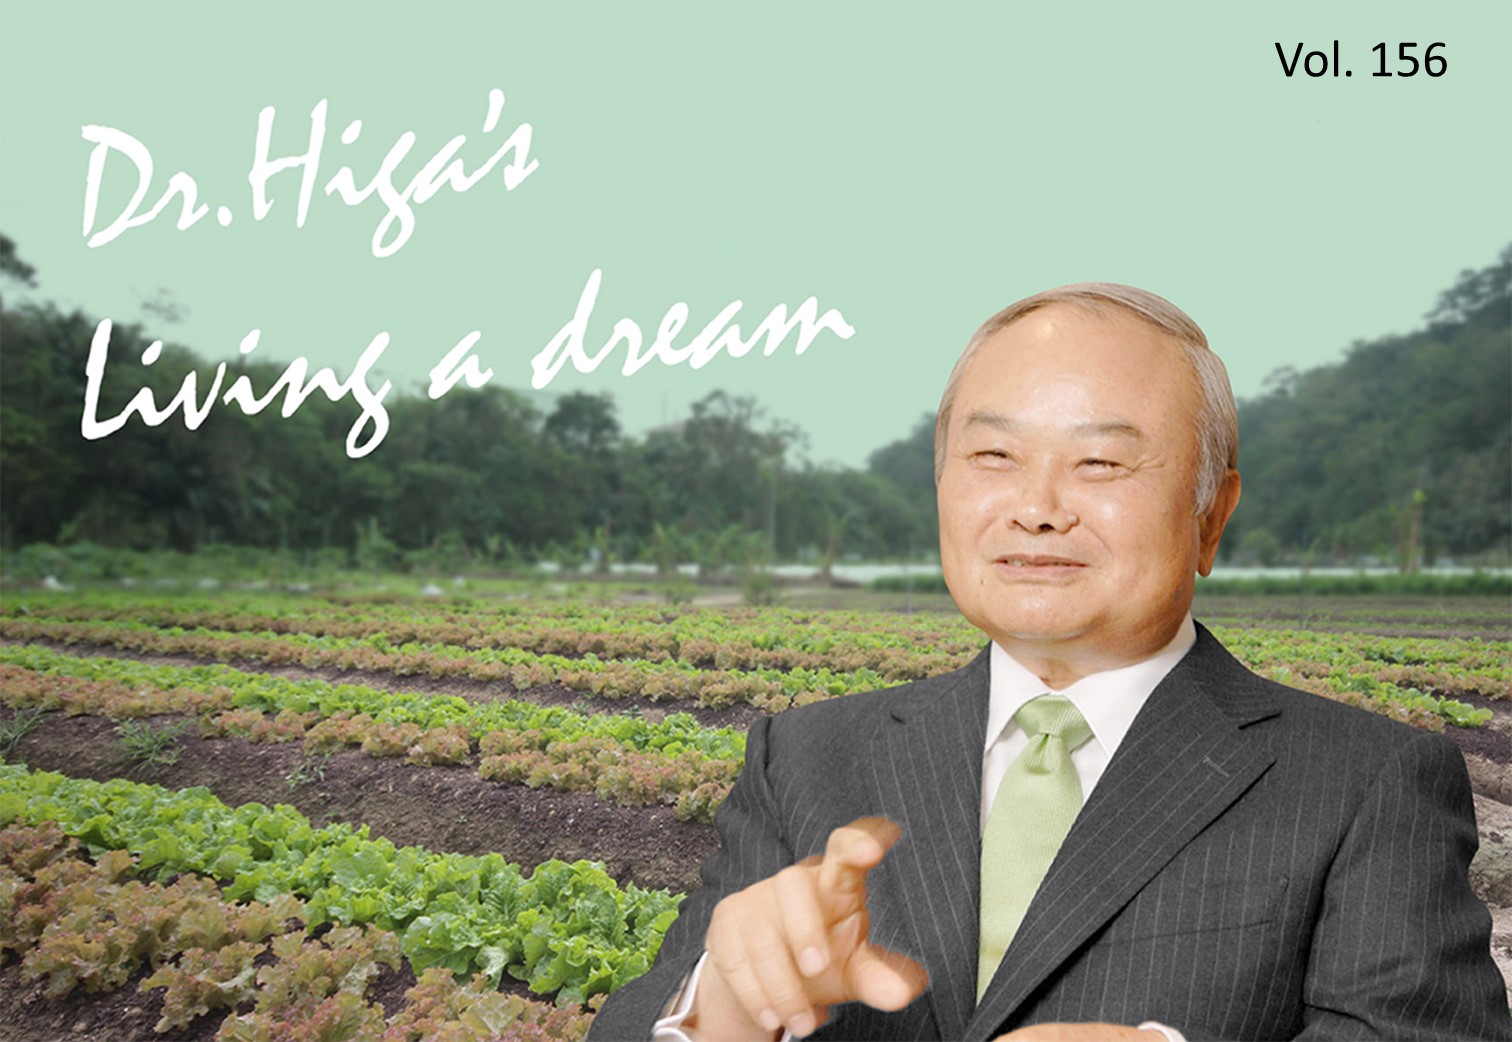 Dr. Higa's "Living a Dream": The latest article #156 is up!